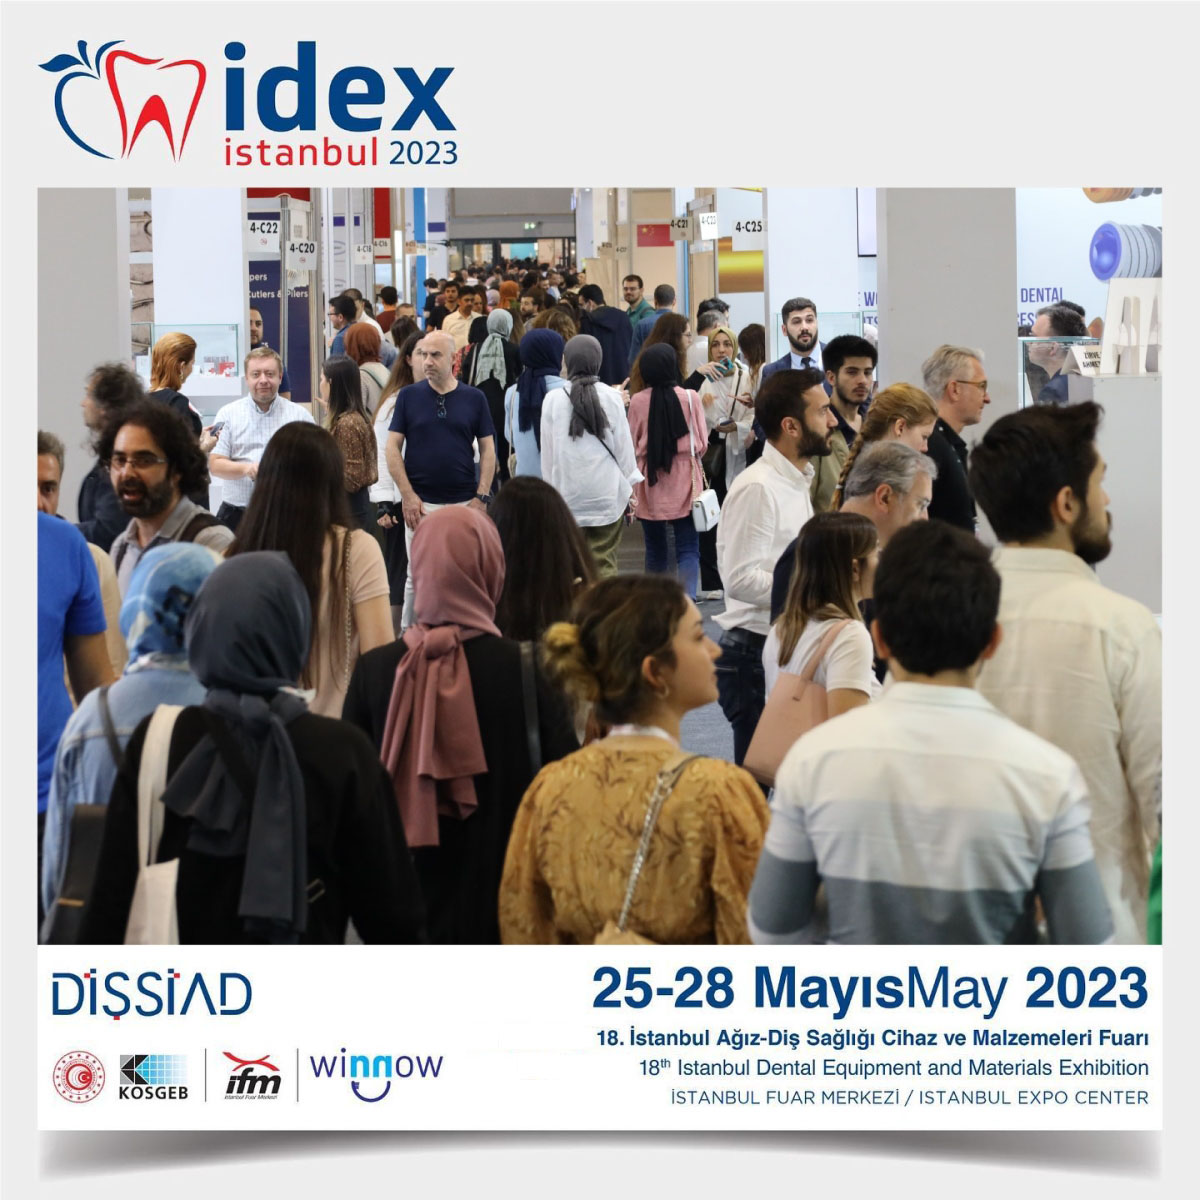 The global dental industry meets at IDEX Istanbul 2023 IDEX İstanbul 2024